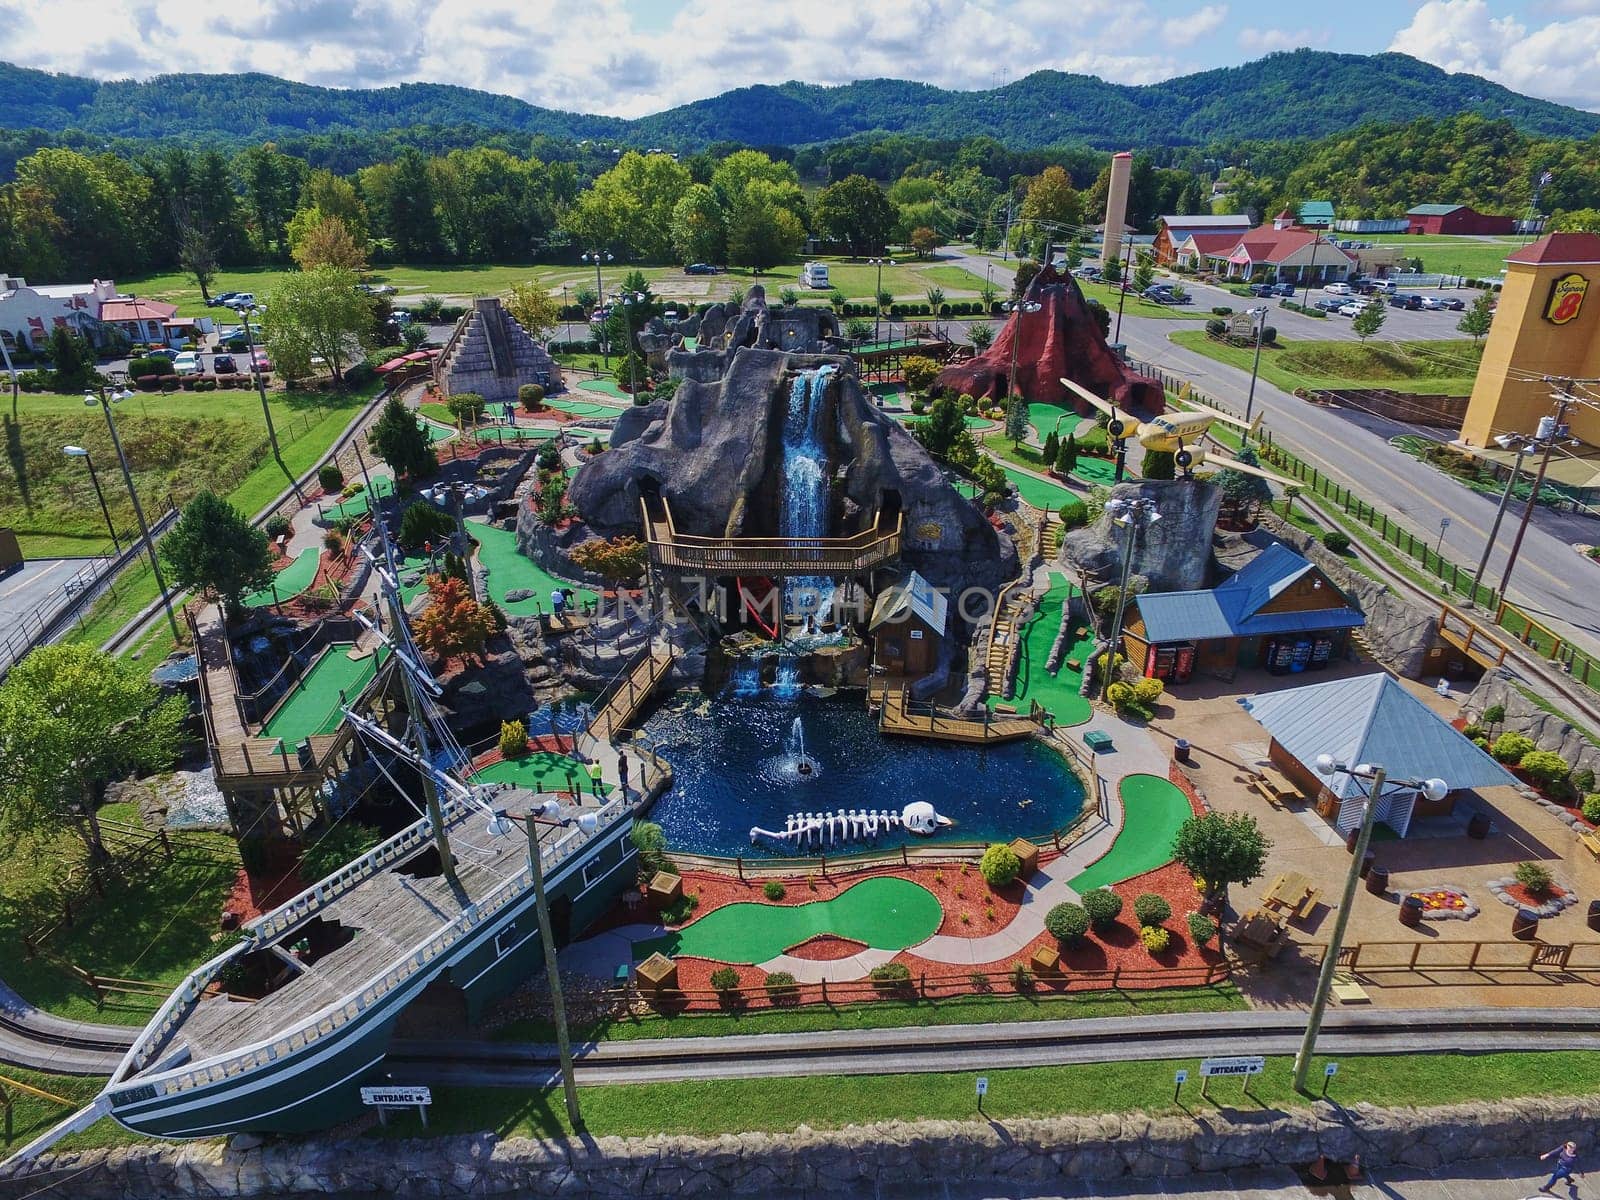 Aerial view of a bustling, colorful miniature golf course in tourist-friendly Gatlinburg, Tennessee, highlighting a pirate ship, waterfalls, and a volcano.